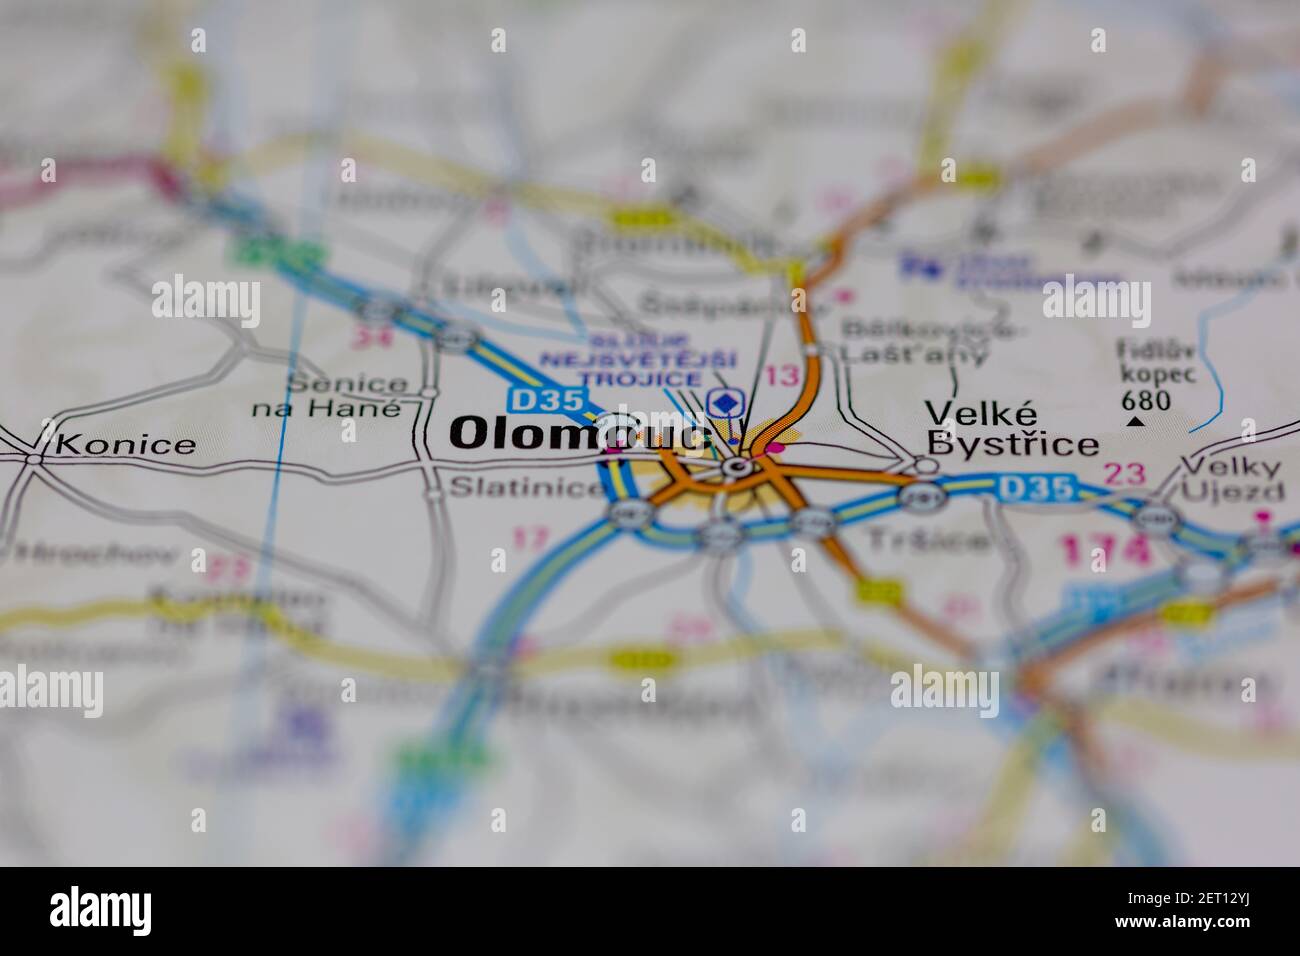 Olomouc Shown on a road map or Geography map Stock Photo